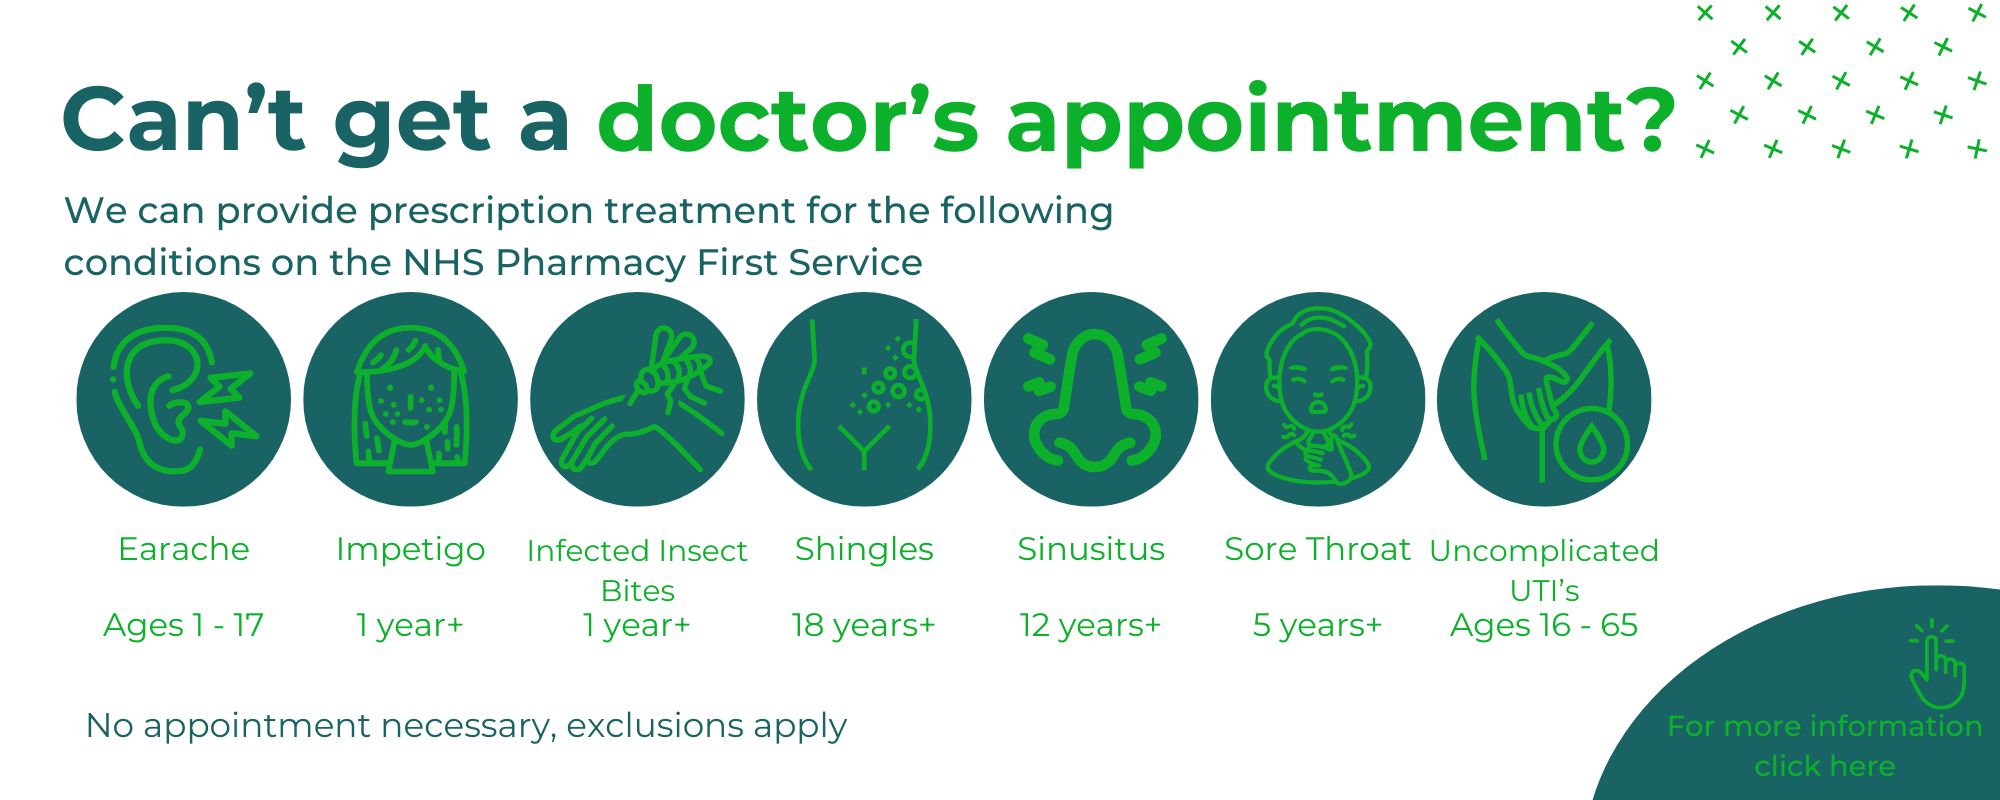 Pharmacy First Services Free NHS Click Here for more information